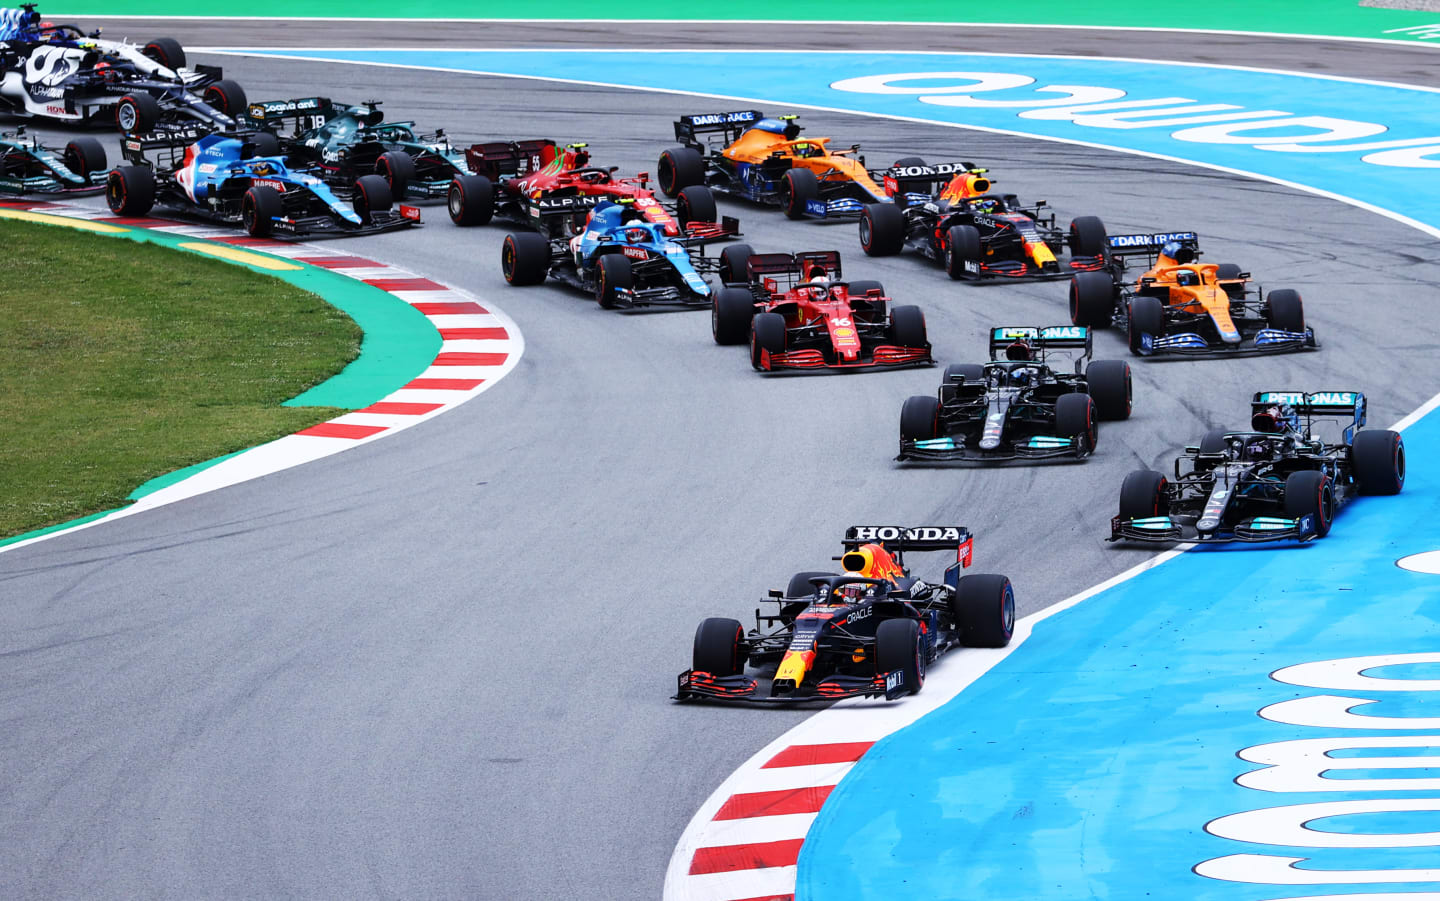 BARCELONA, SPAIN - MAY 09: Max Verstappen of the Netherlands driving the (33) Red Bull Racing RB16B Honda leads the field during the F1 Grand Prix of Spain at Circuit de Barcelona-Catalunya on May 09, 2021 in Barcelona, Spain. (Photo by Bryn Lennon/Getty Images)